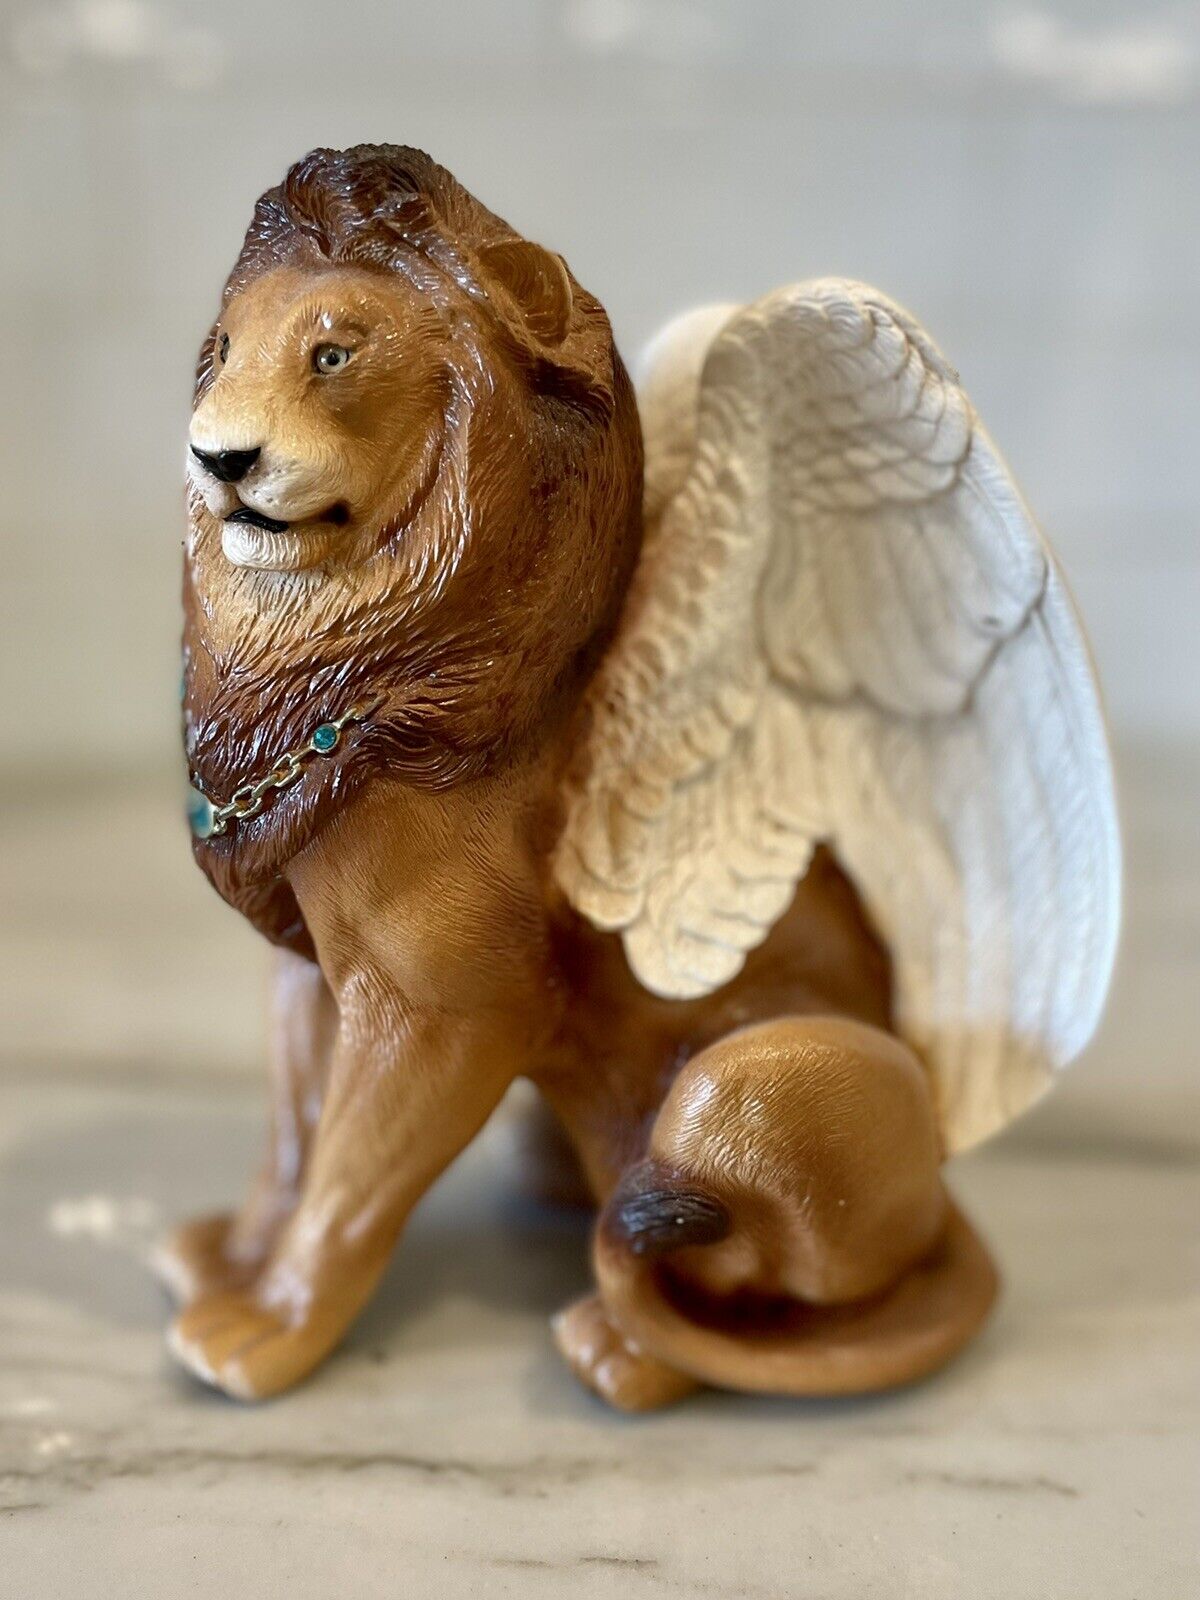 Windstone Editions Sculpture "flion" Winged Lion Sculpture Figure By Melody Pena